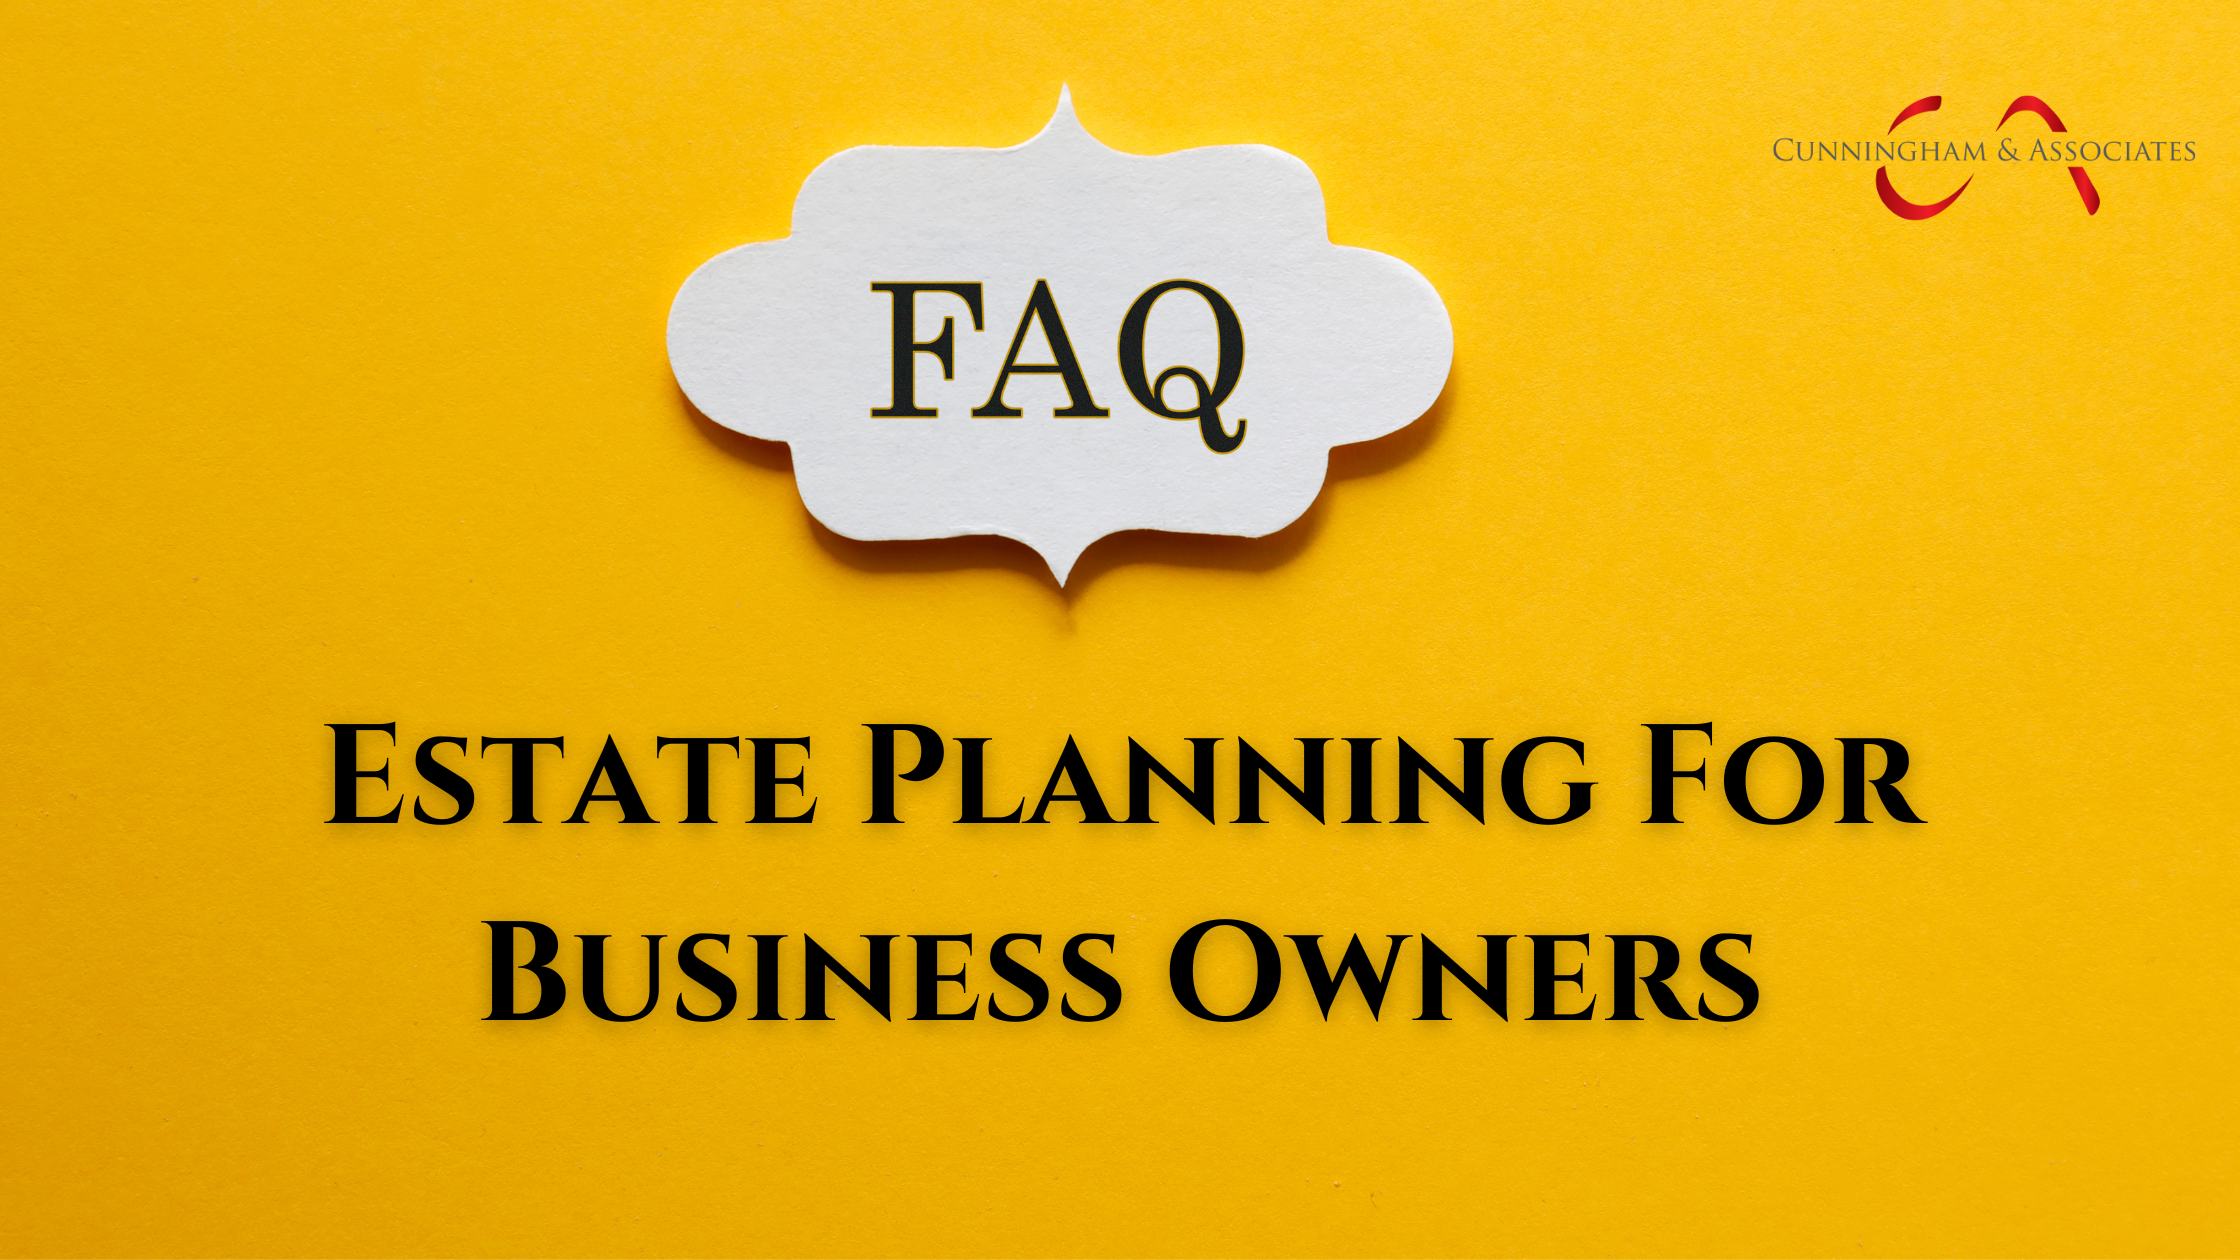 Frequently Asked Questions about Estate Planning for Business Owners